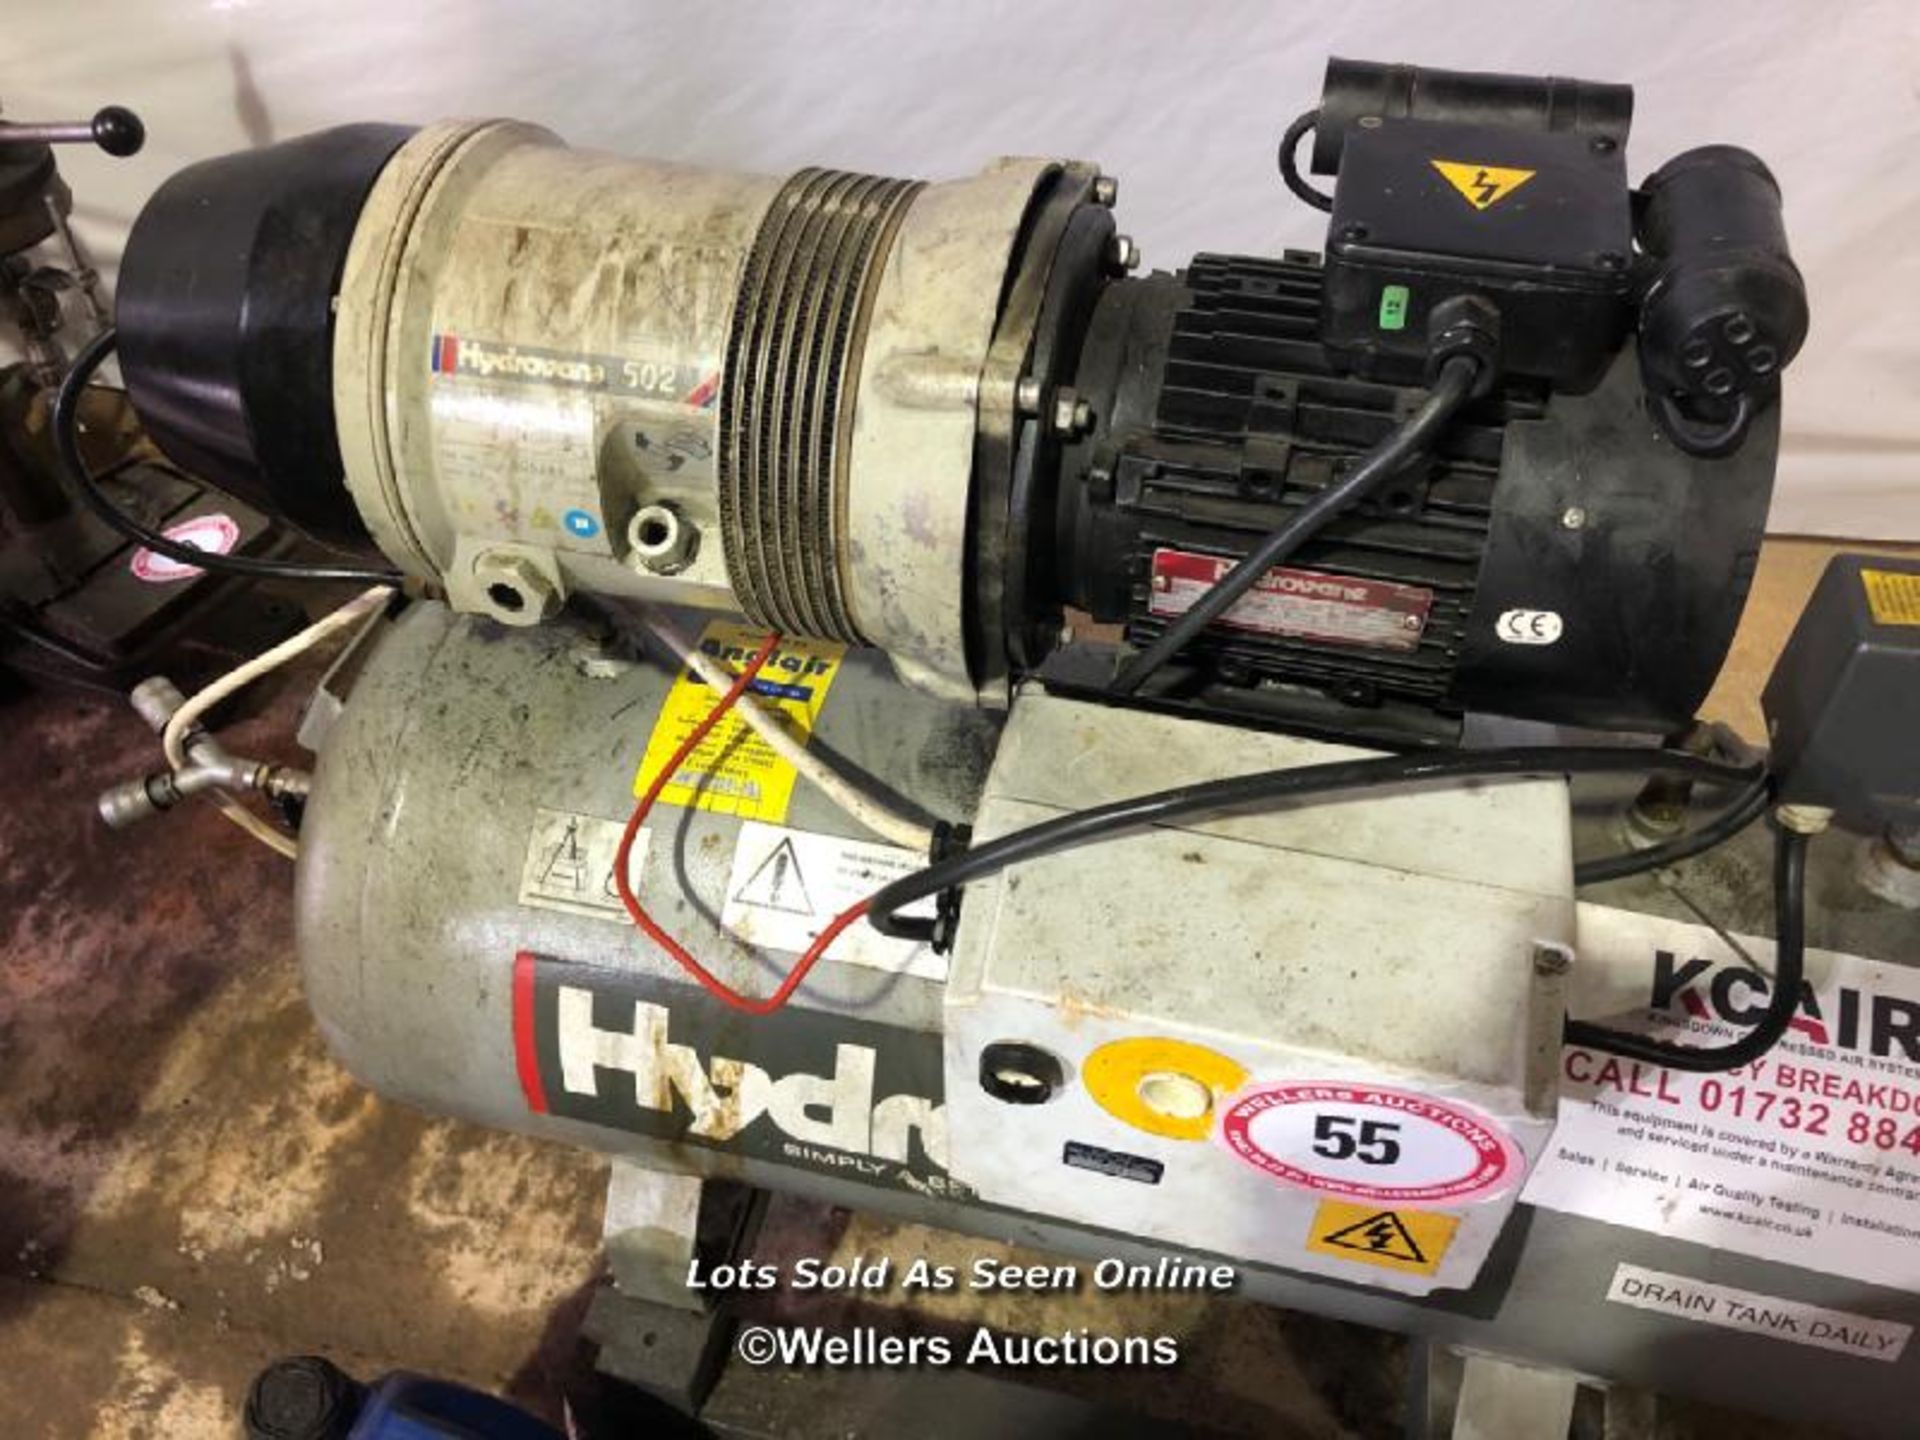 HYDROVANE 502 240V AIR COMPRESSOR, WITH 2 GAL. OF OIL, IN WORKING ORDER - Image 2 of 6